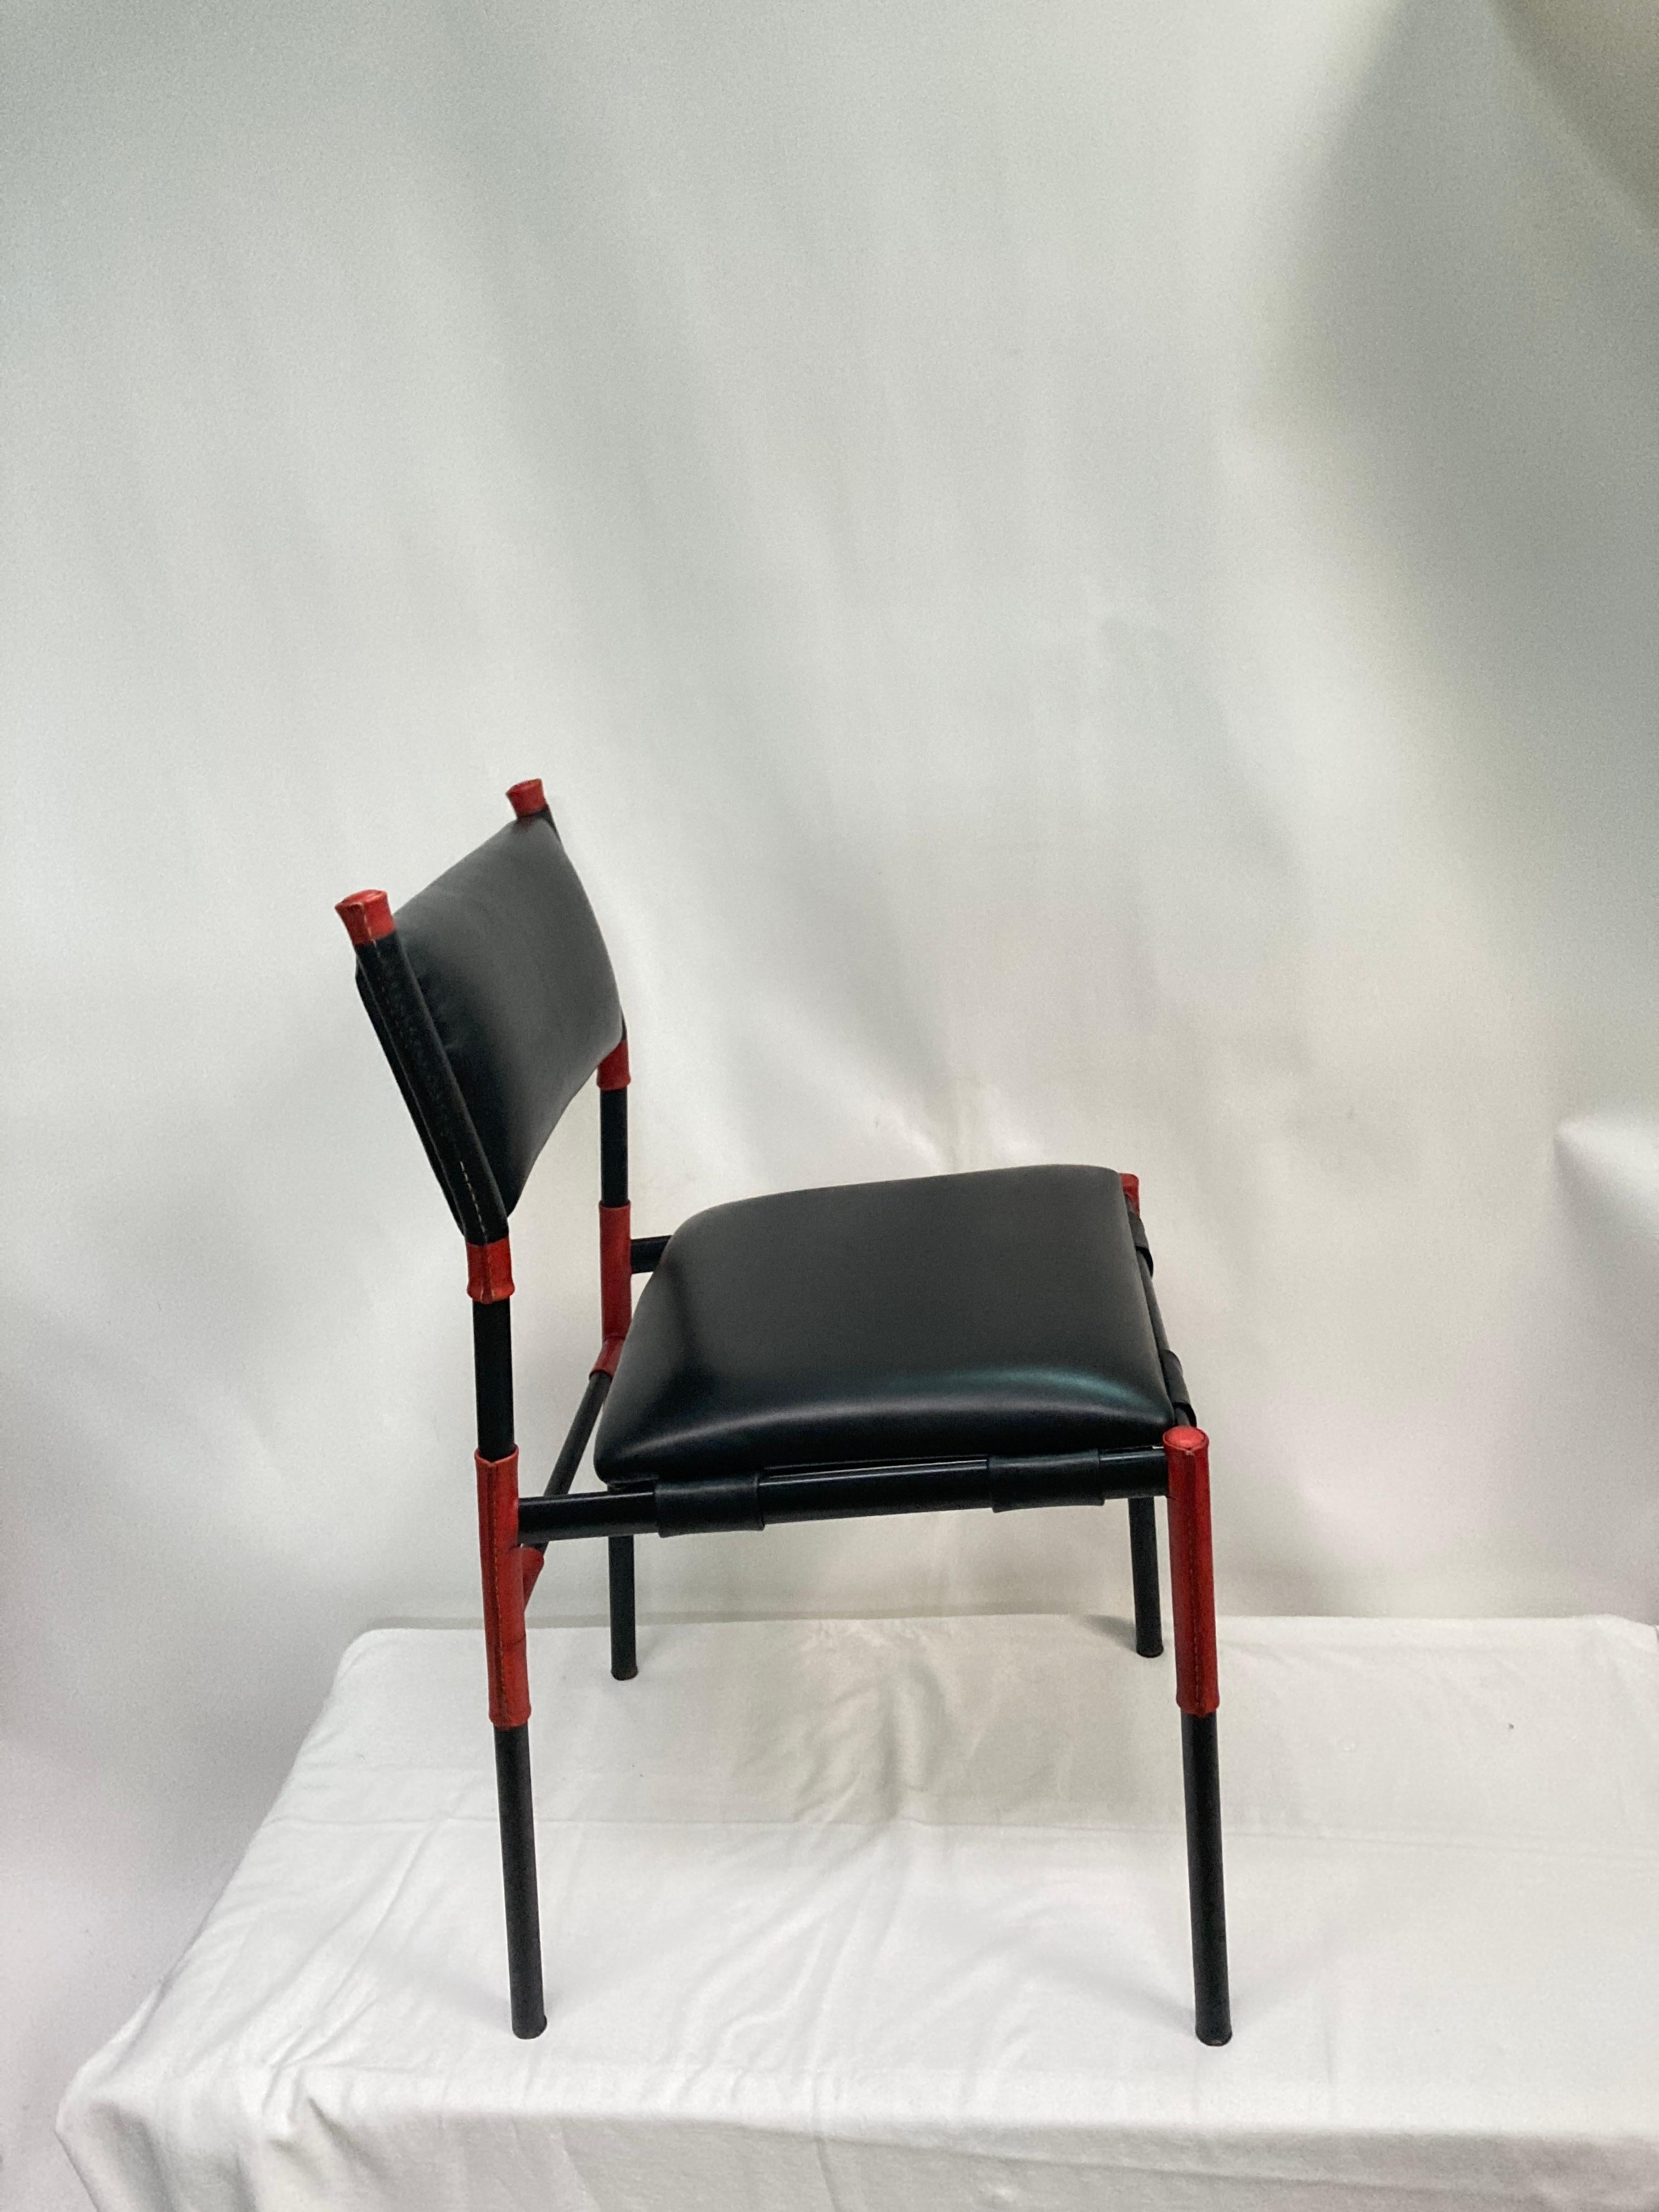 1950's Stitched leather bi-color chairs
Black and red leather
Designed by Jacques Adnet